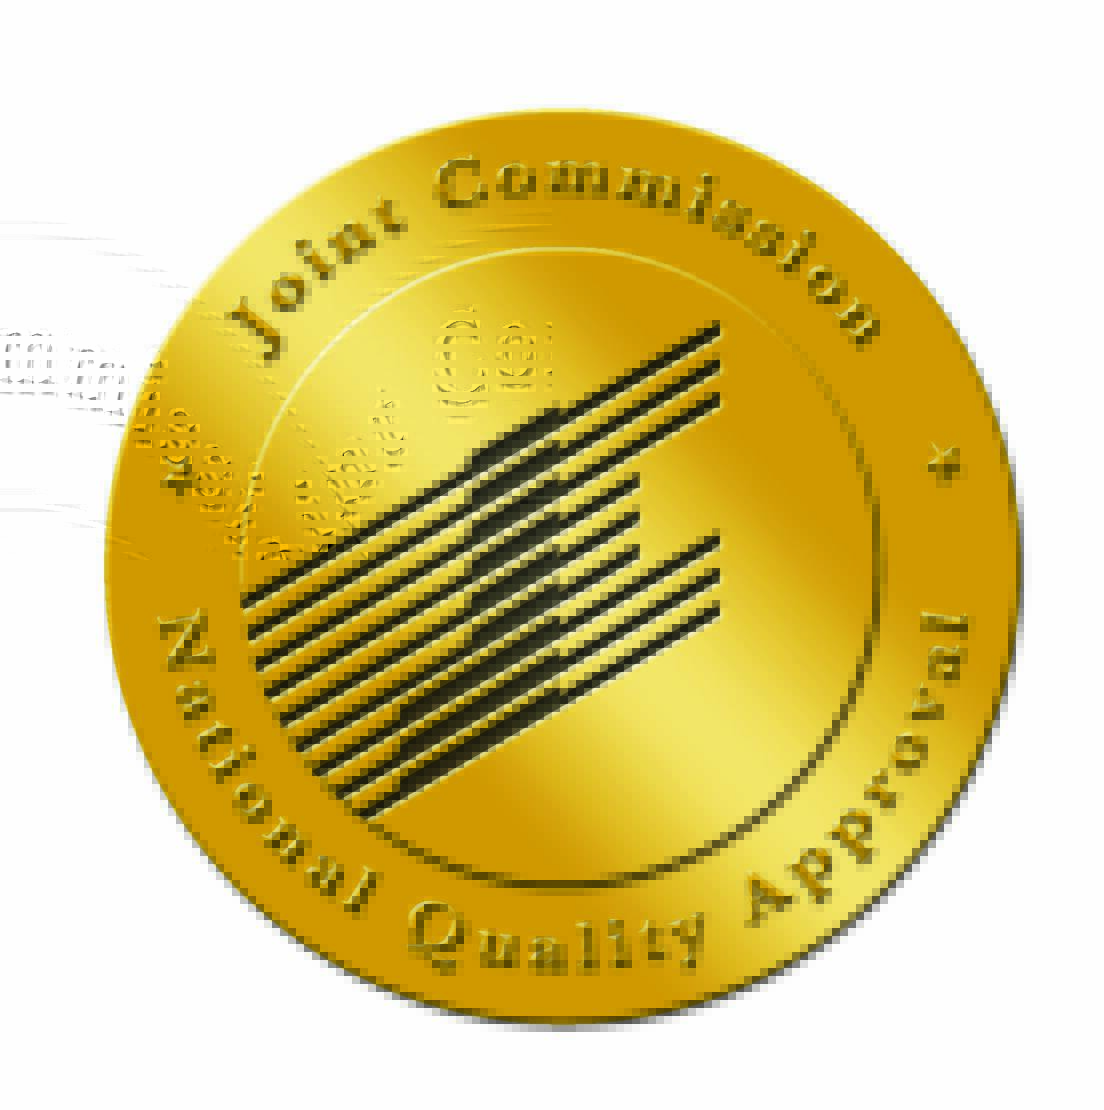 Joint Commission Logo